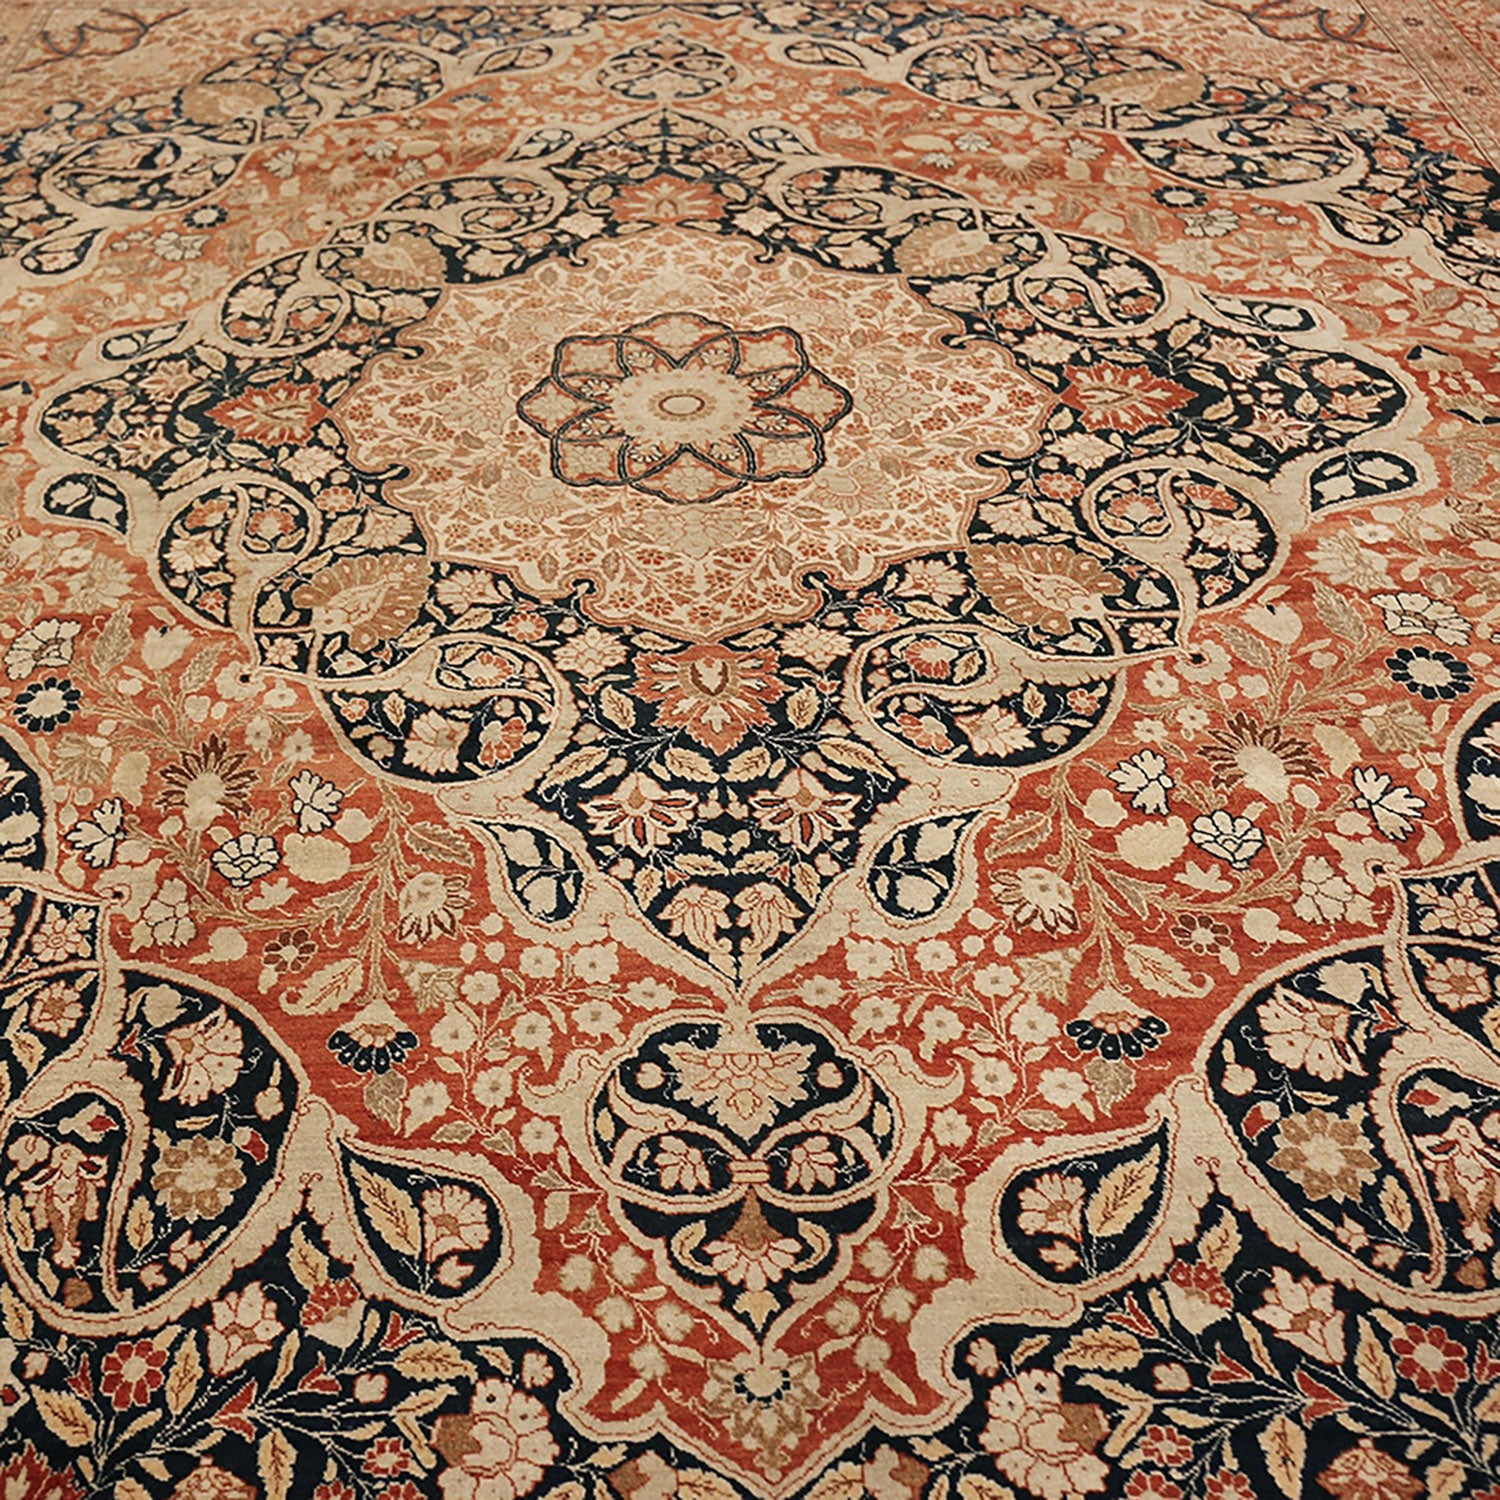 An intricately designed hand-knotted Persian carpet showcasing floral motifs.